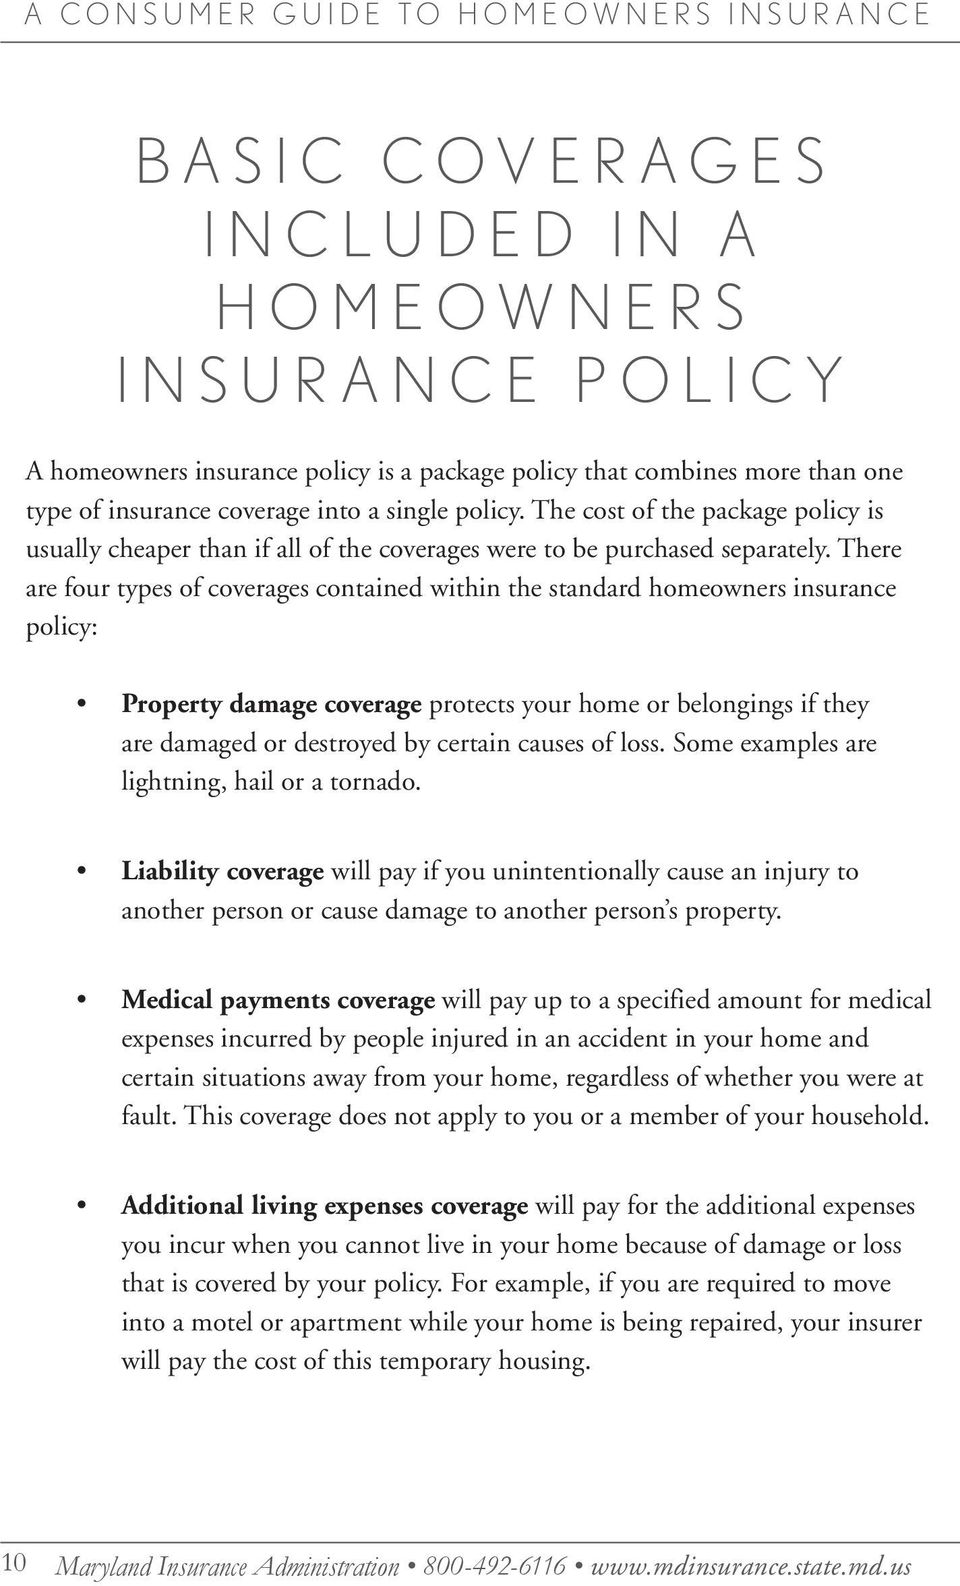 There are four types of coverages contained within the standard homeowners insurance policy: Property damage coverage protects your home or belongings if they are damaged or destroyed by certain